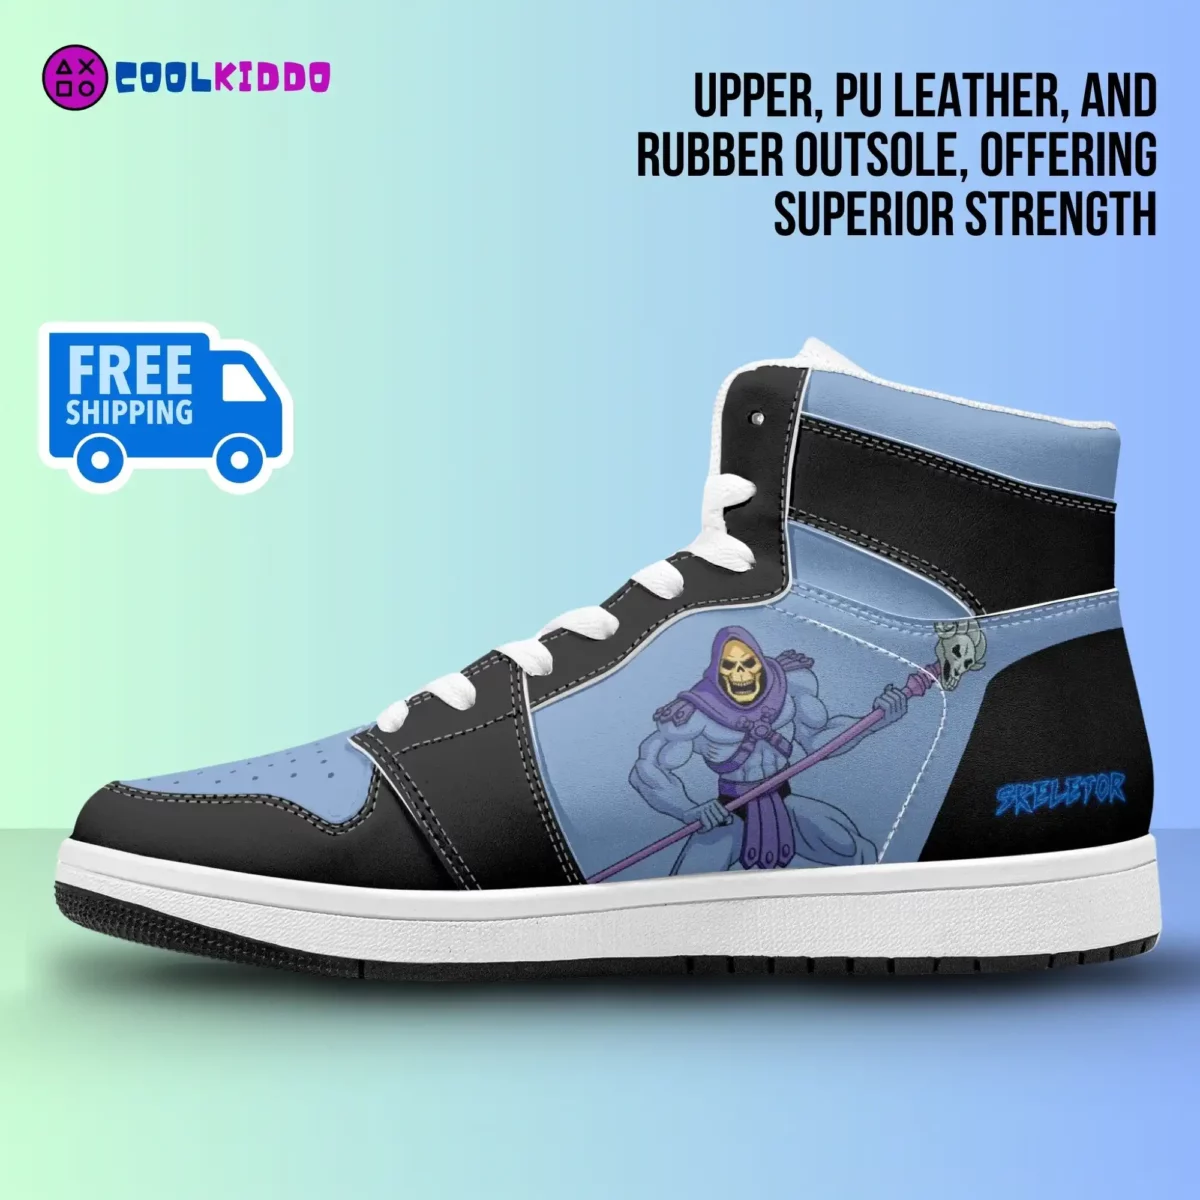 Custom Skeletor Masters of the Universe High-Top Adult/Youth Casual Sneakers Cool Kiddo 14